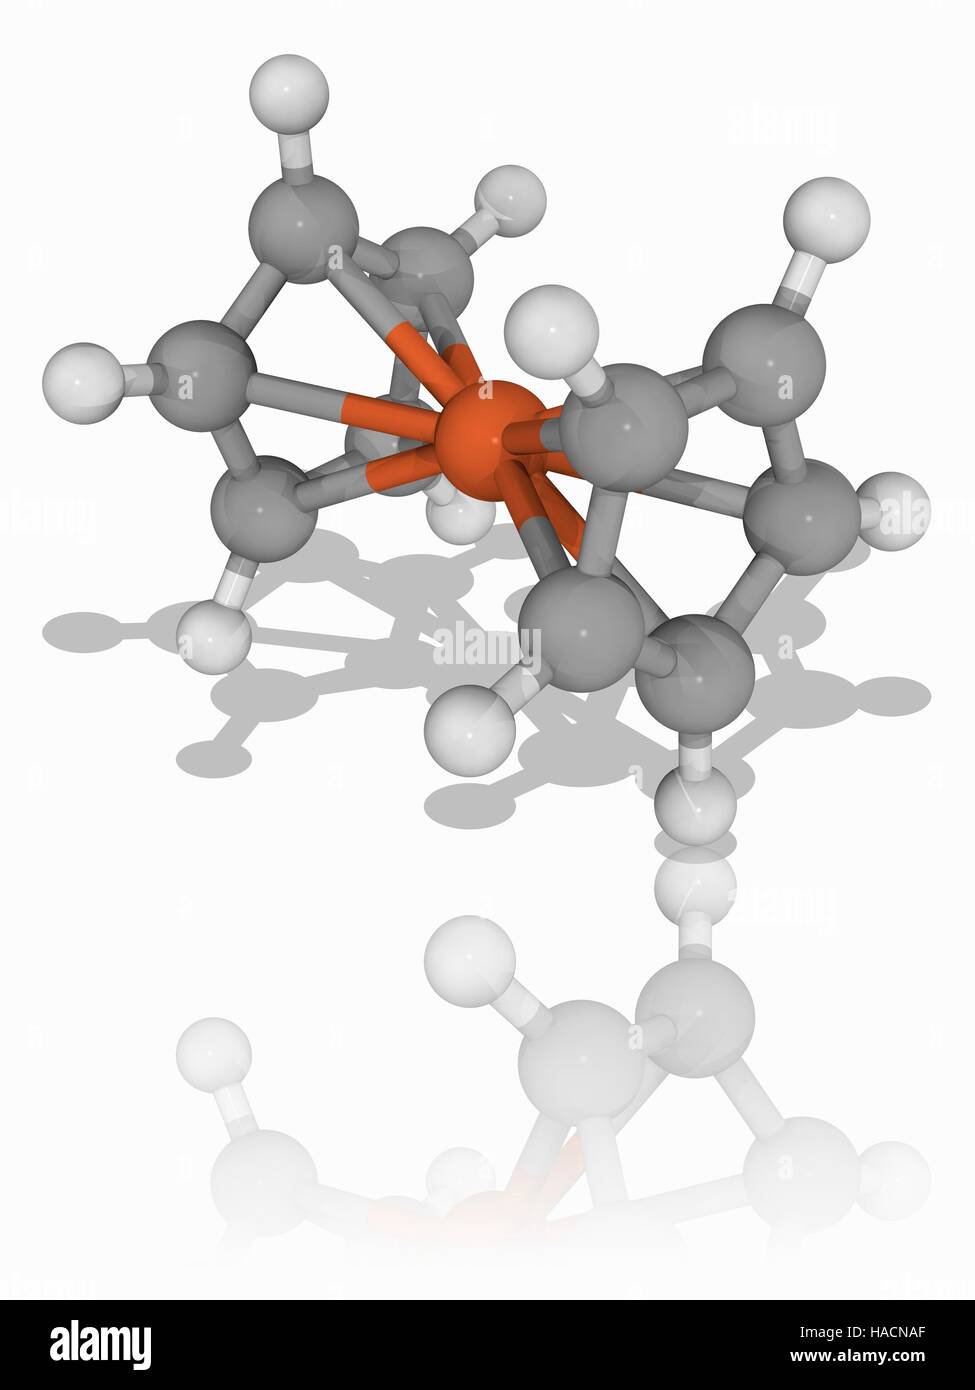 Ferrocene. Molecular model of the organometallic compound ferrocene (C10.H10.Fe). This is a metallocene consisting of two cyclopentadienyl rings bound by a central iron atom. The discovery of this compound and its properties led to the synthesis of many similar molecules and an explosion of interest in organometallic chemistry. Atoms are represented as spheres and are colour-coded: carbon (grey), hydrogen (white) and iron (brown). Illustration. Stock Photo